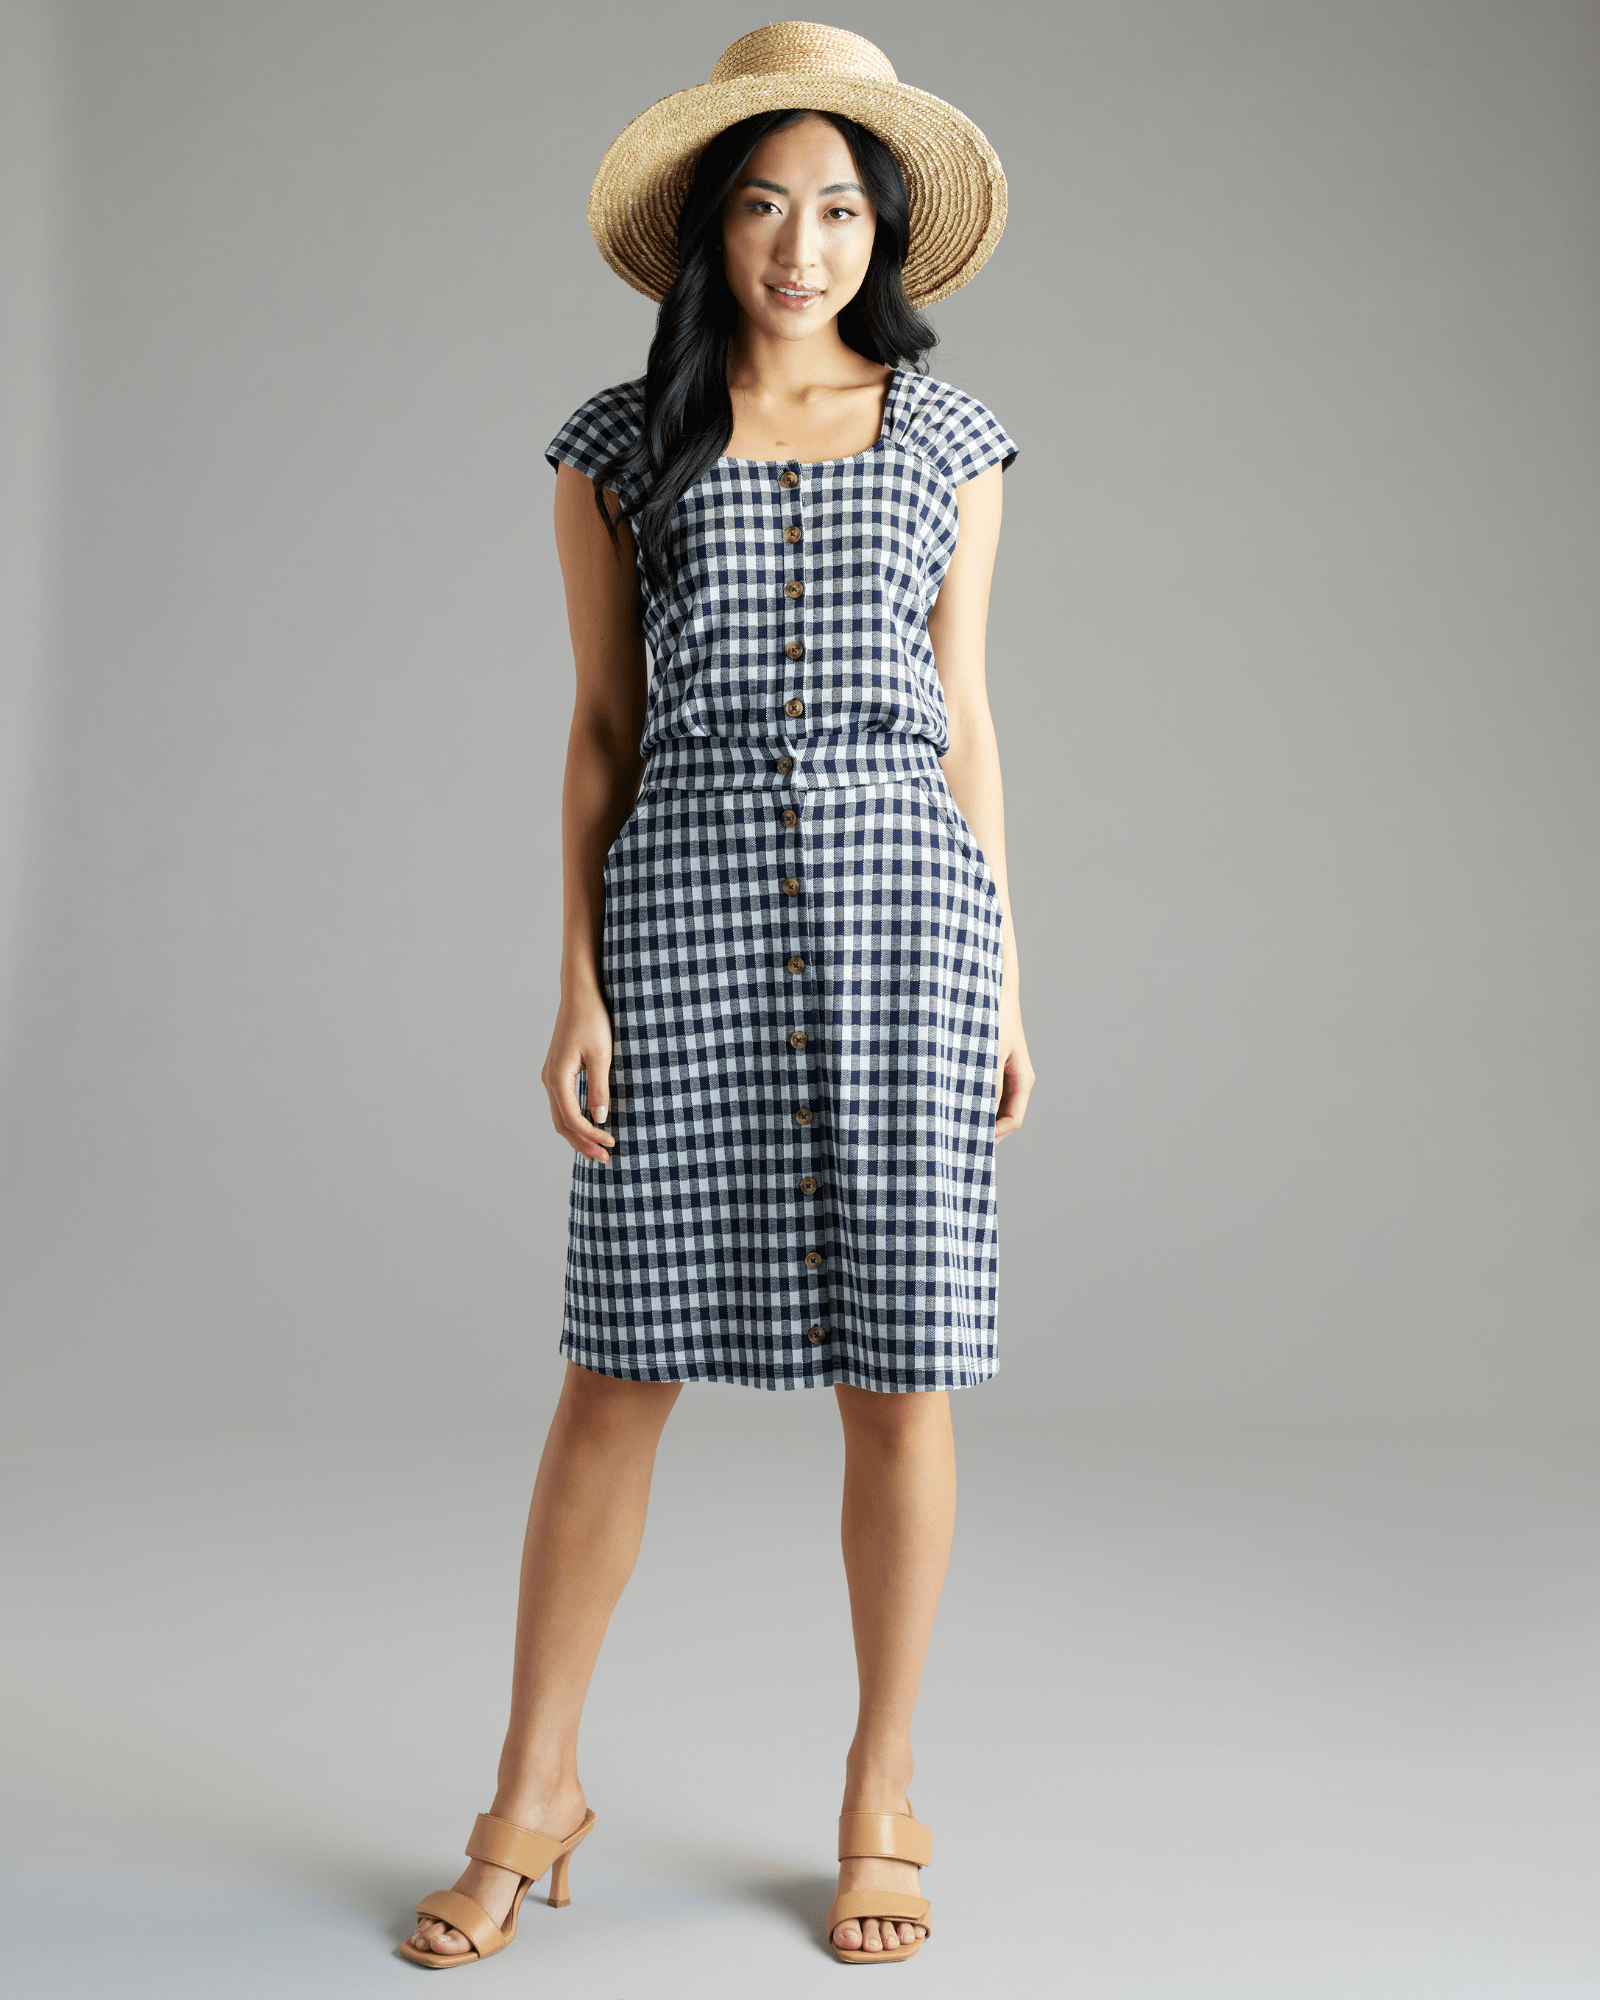 Woman in navy and white gingham knee-length skirt